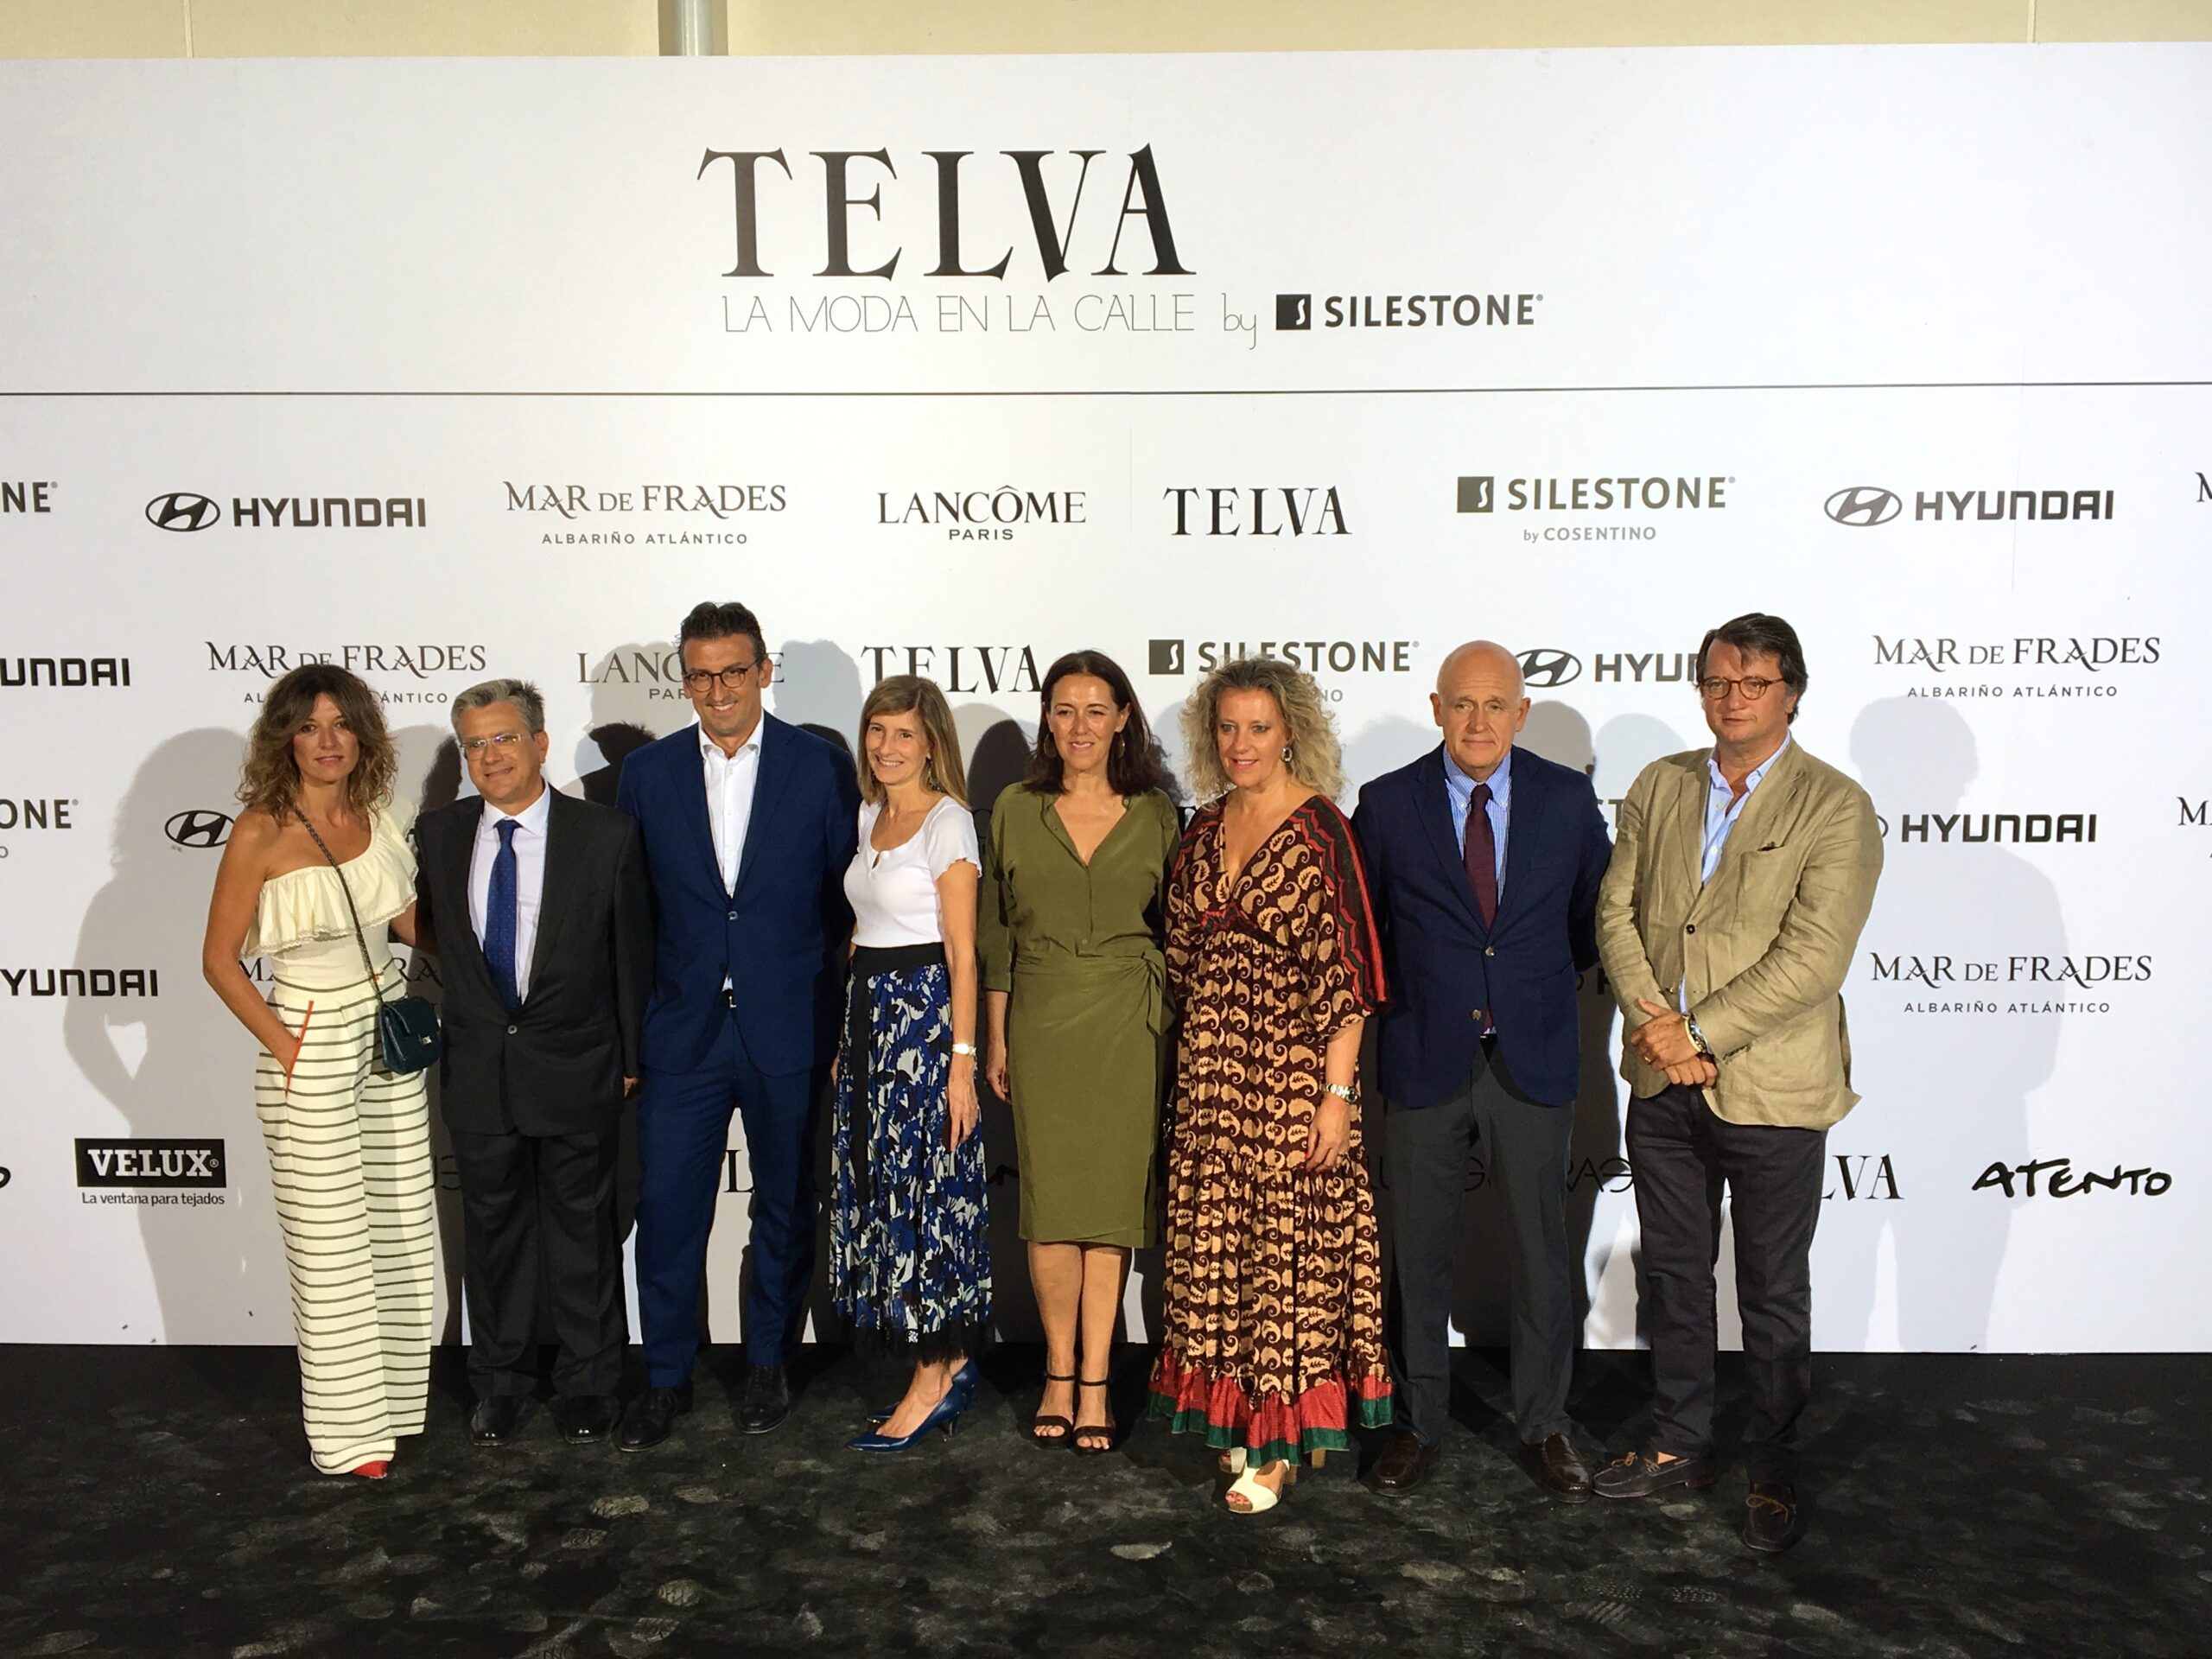 Image of Telva La Moda en la Calle by Silestone Patrocinadores 1 scaled in "Art is Fashion and Fashion is made with Art" - Cosentino